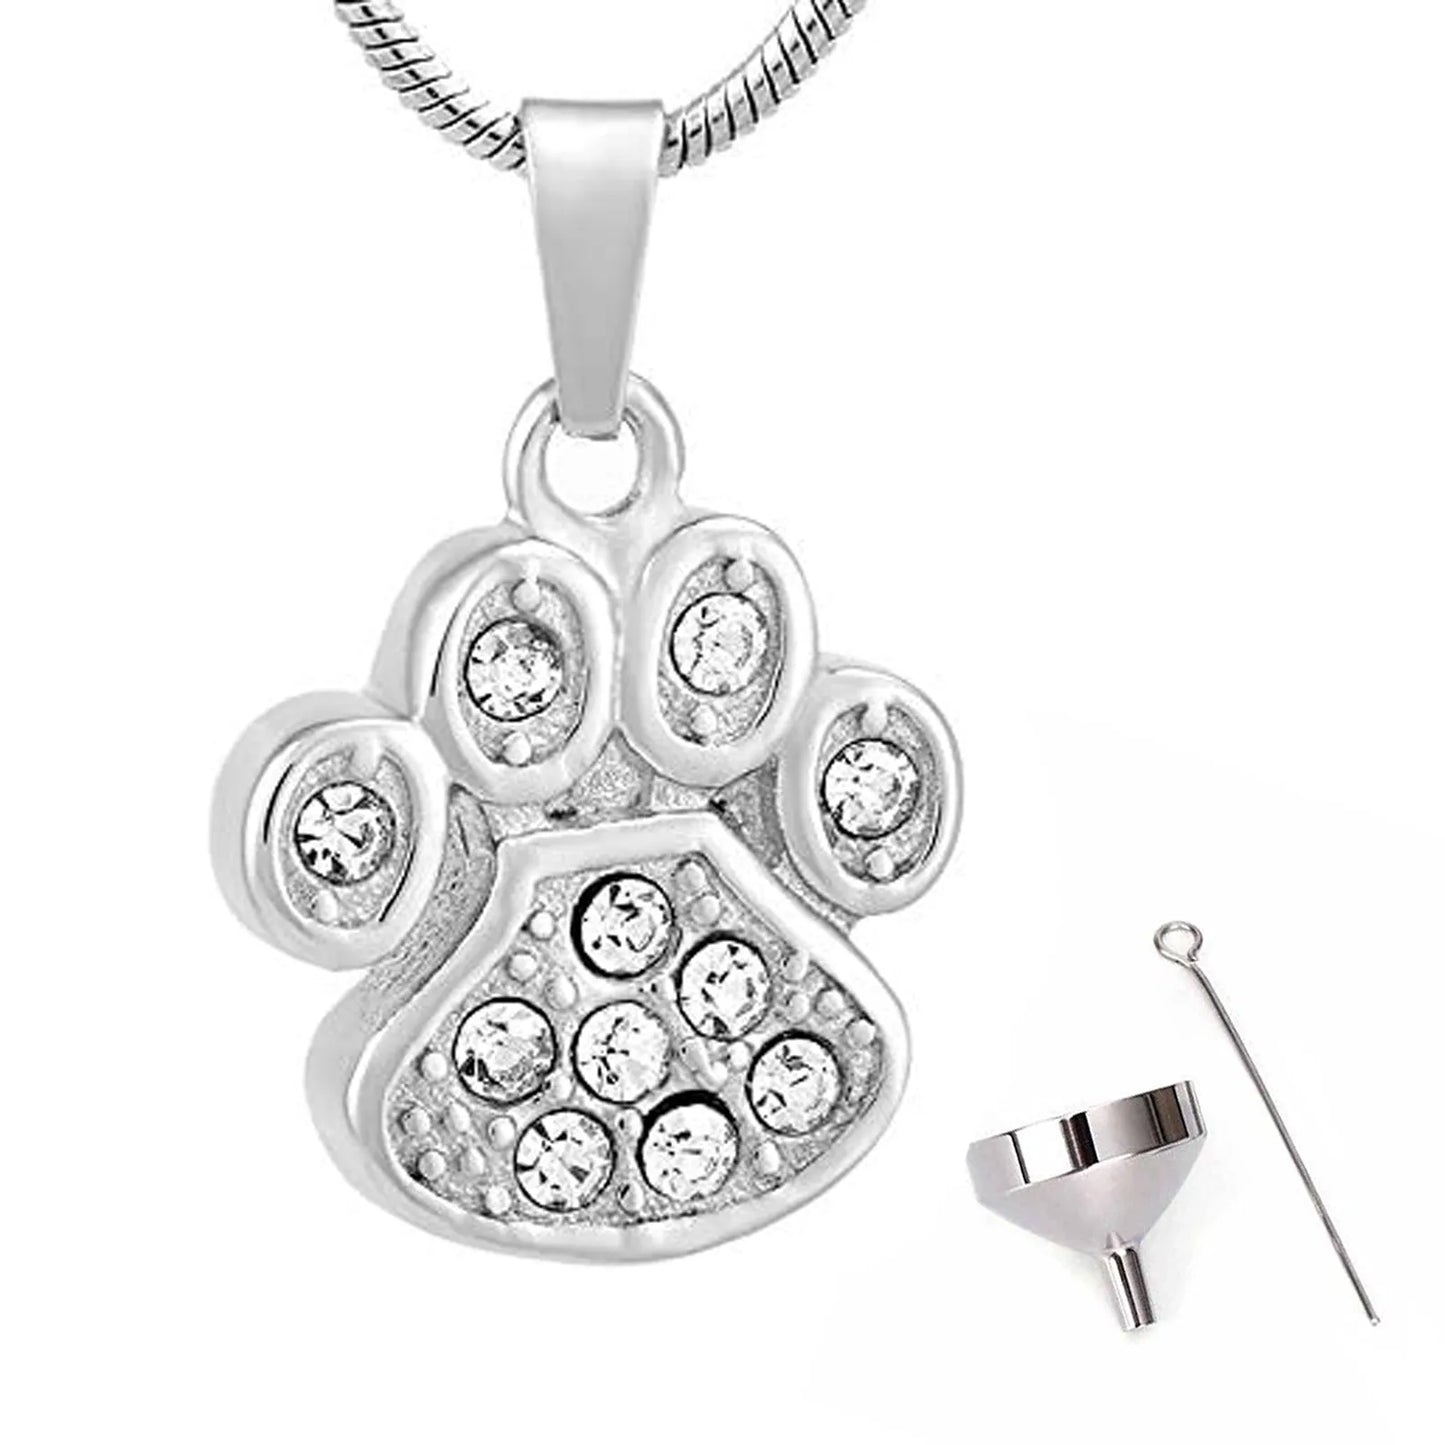 Jeweled Pet Paw Cremation Jewelry For Ashes Keepsake Pendant Necklace